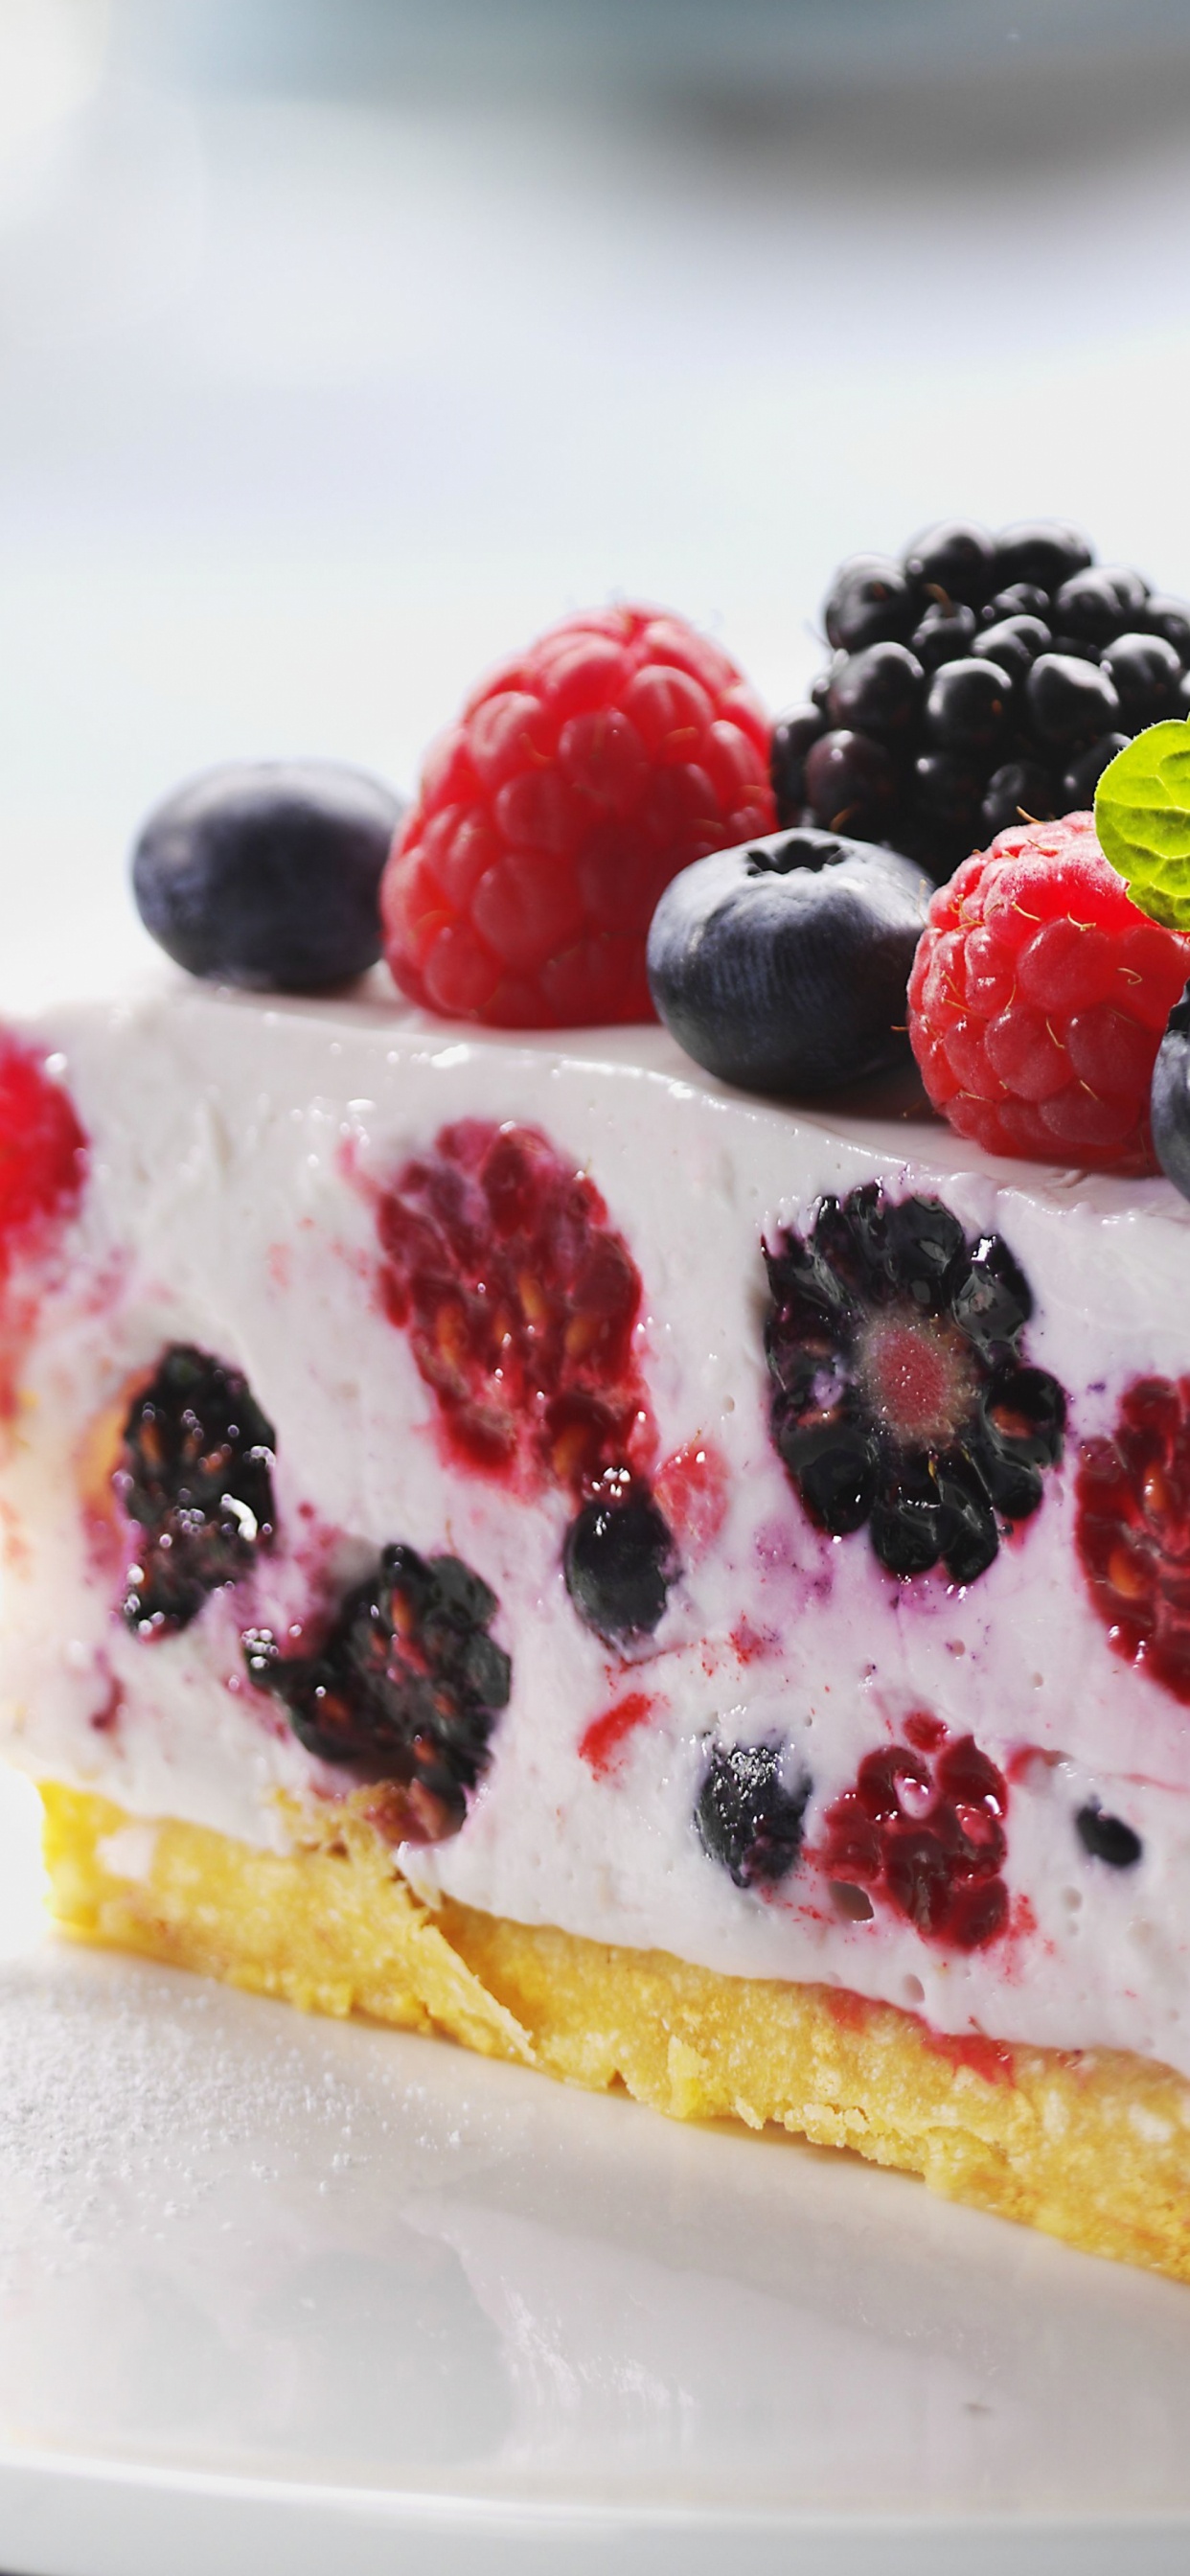 White and Red Cake With Raspberry on Top. Wallpaper in 1242x2688 Resolution